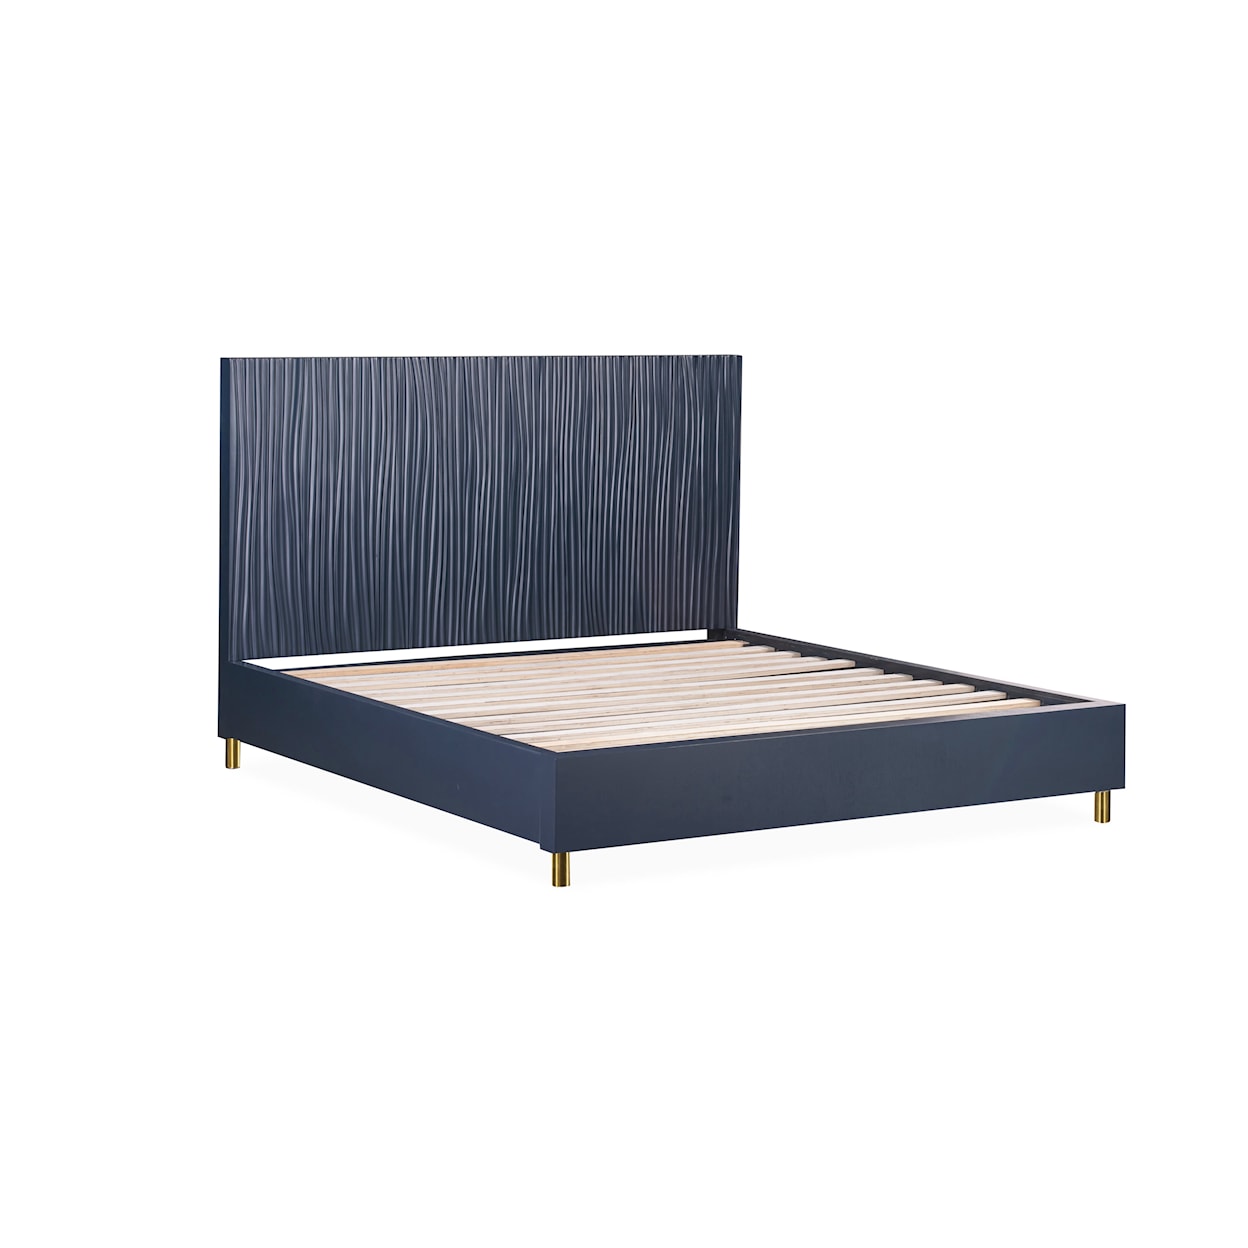 Modus International Argento California King Wave-Patterned Bed